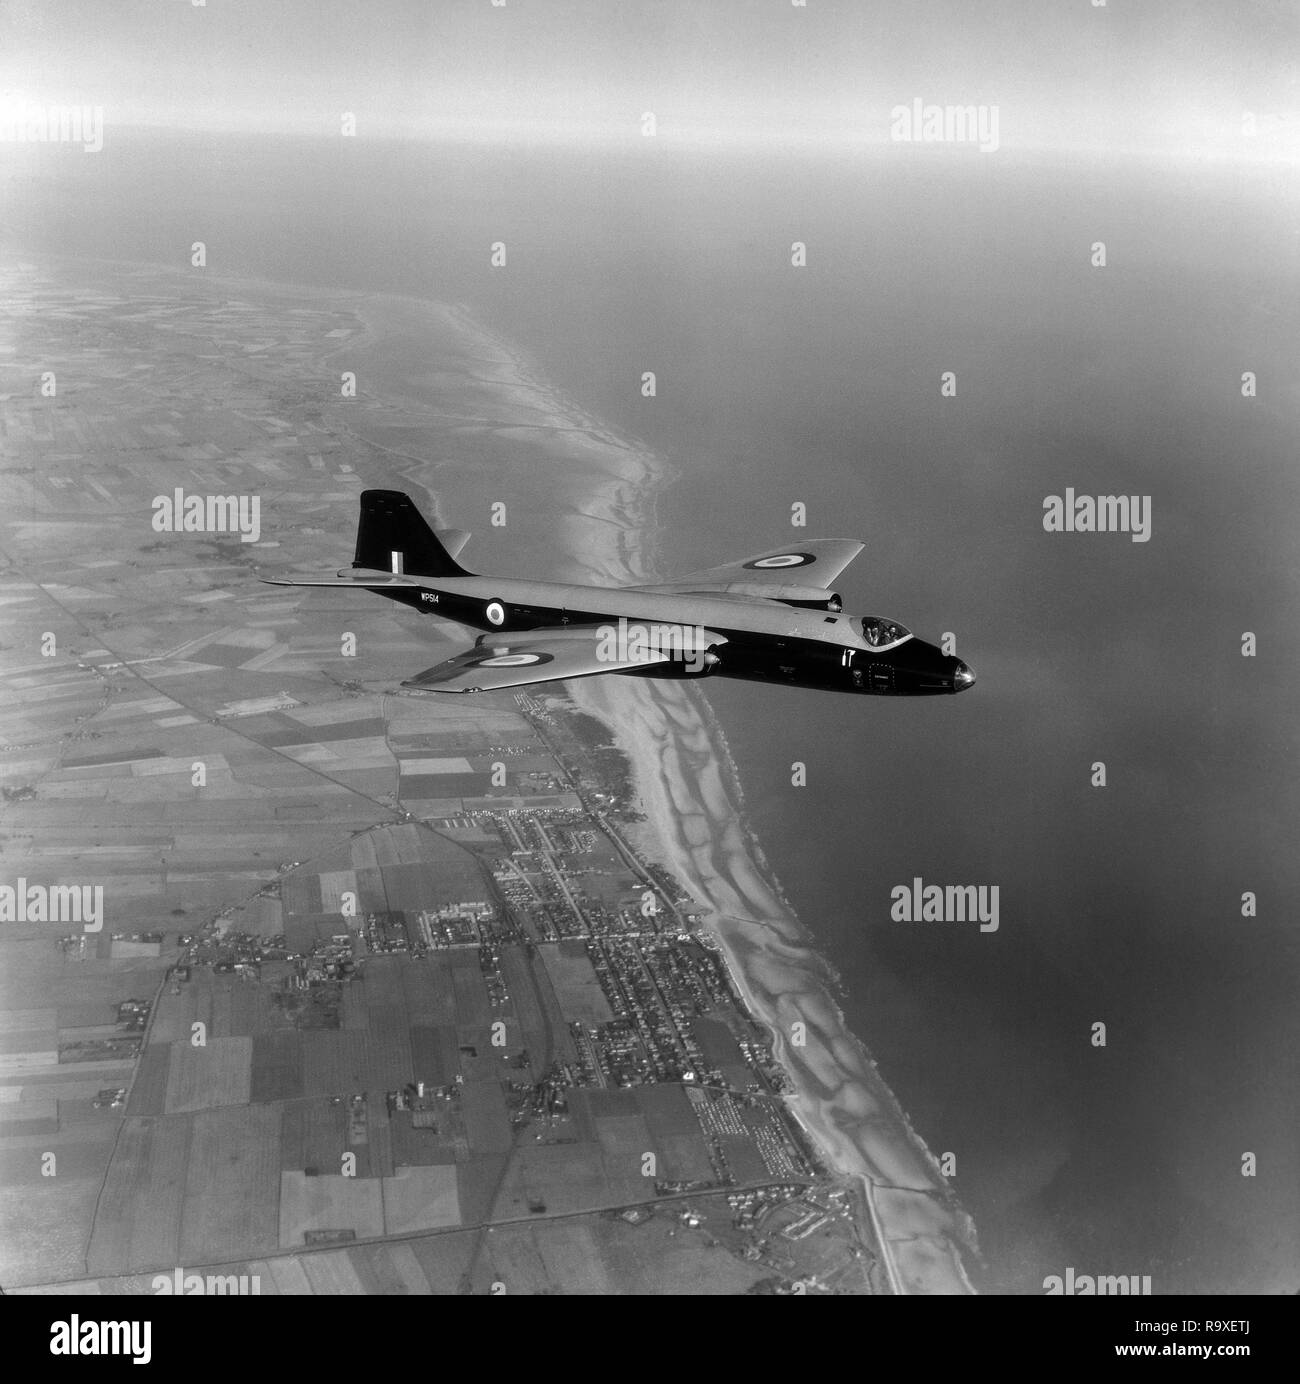 An English Electric Canberra B2 aircraft, serial number WP514, of the British Royal Air Force, in flight over the south coast of England in 1956. Stock Photo